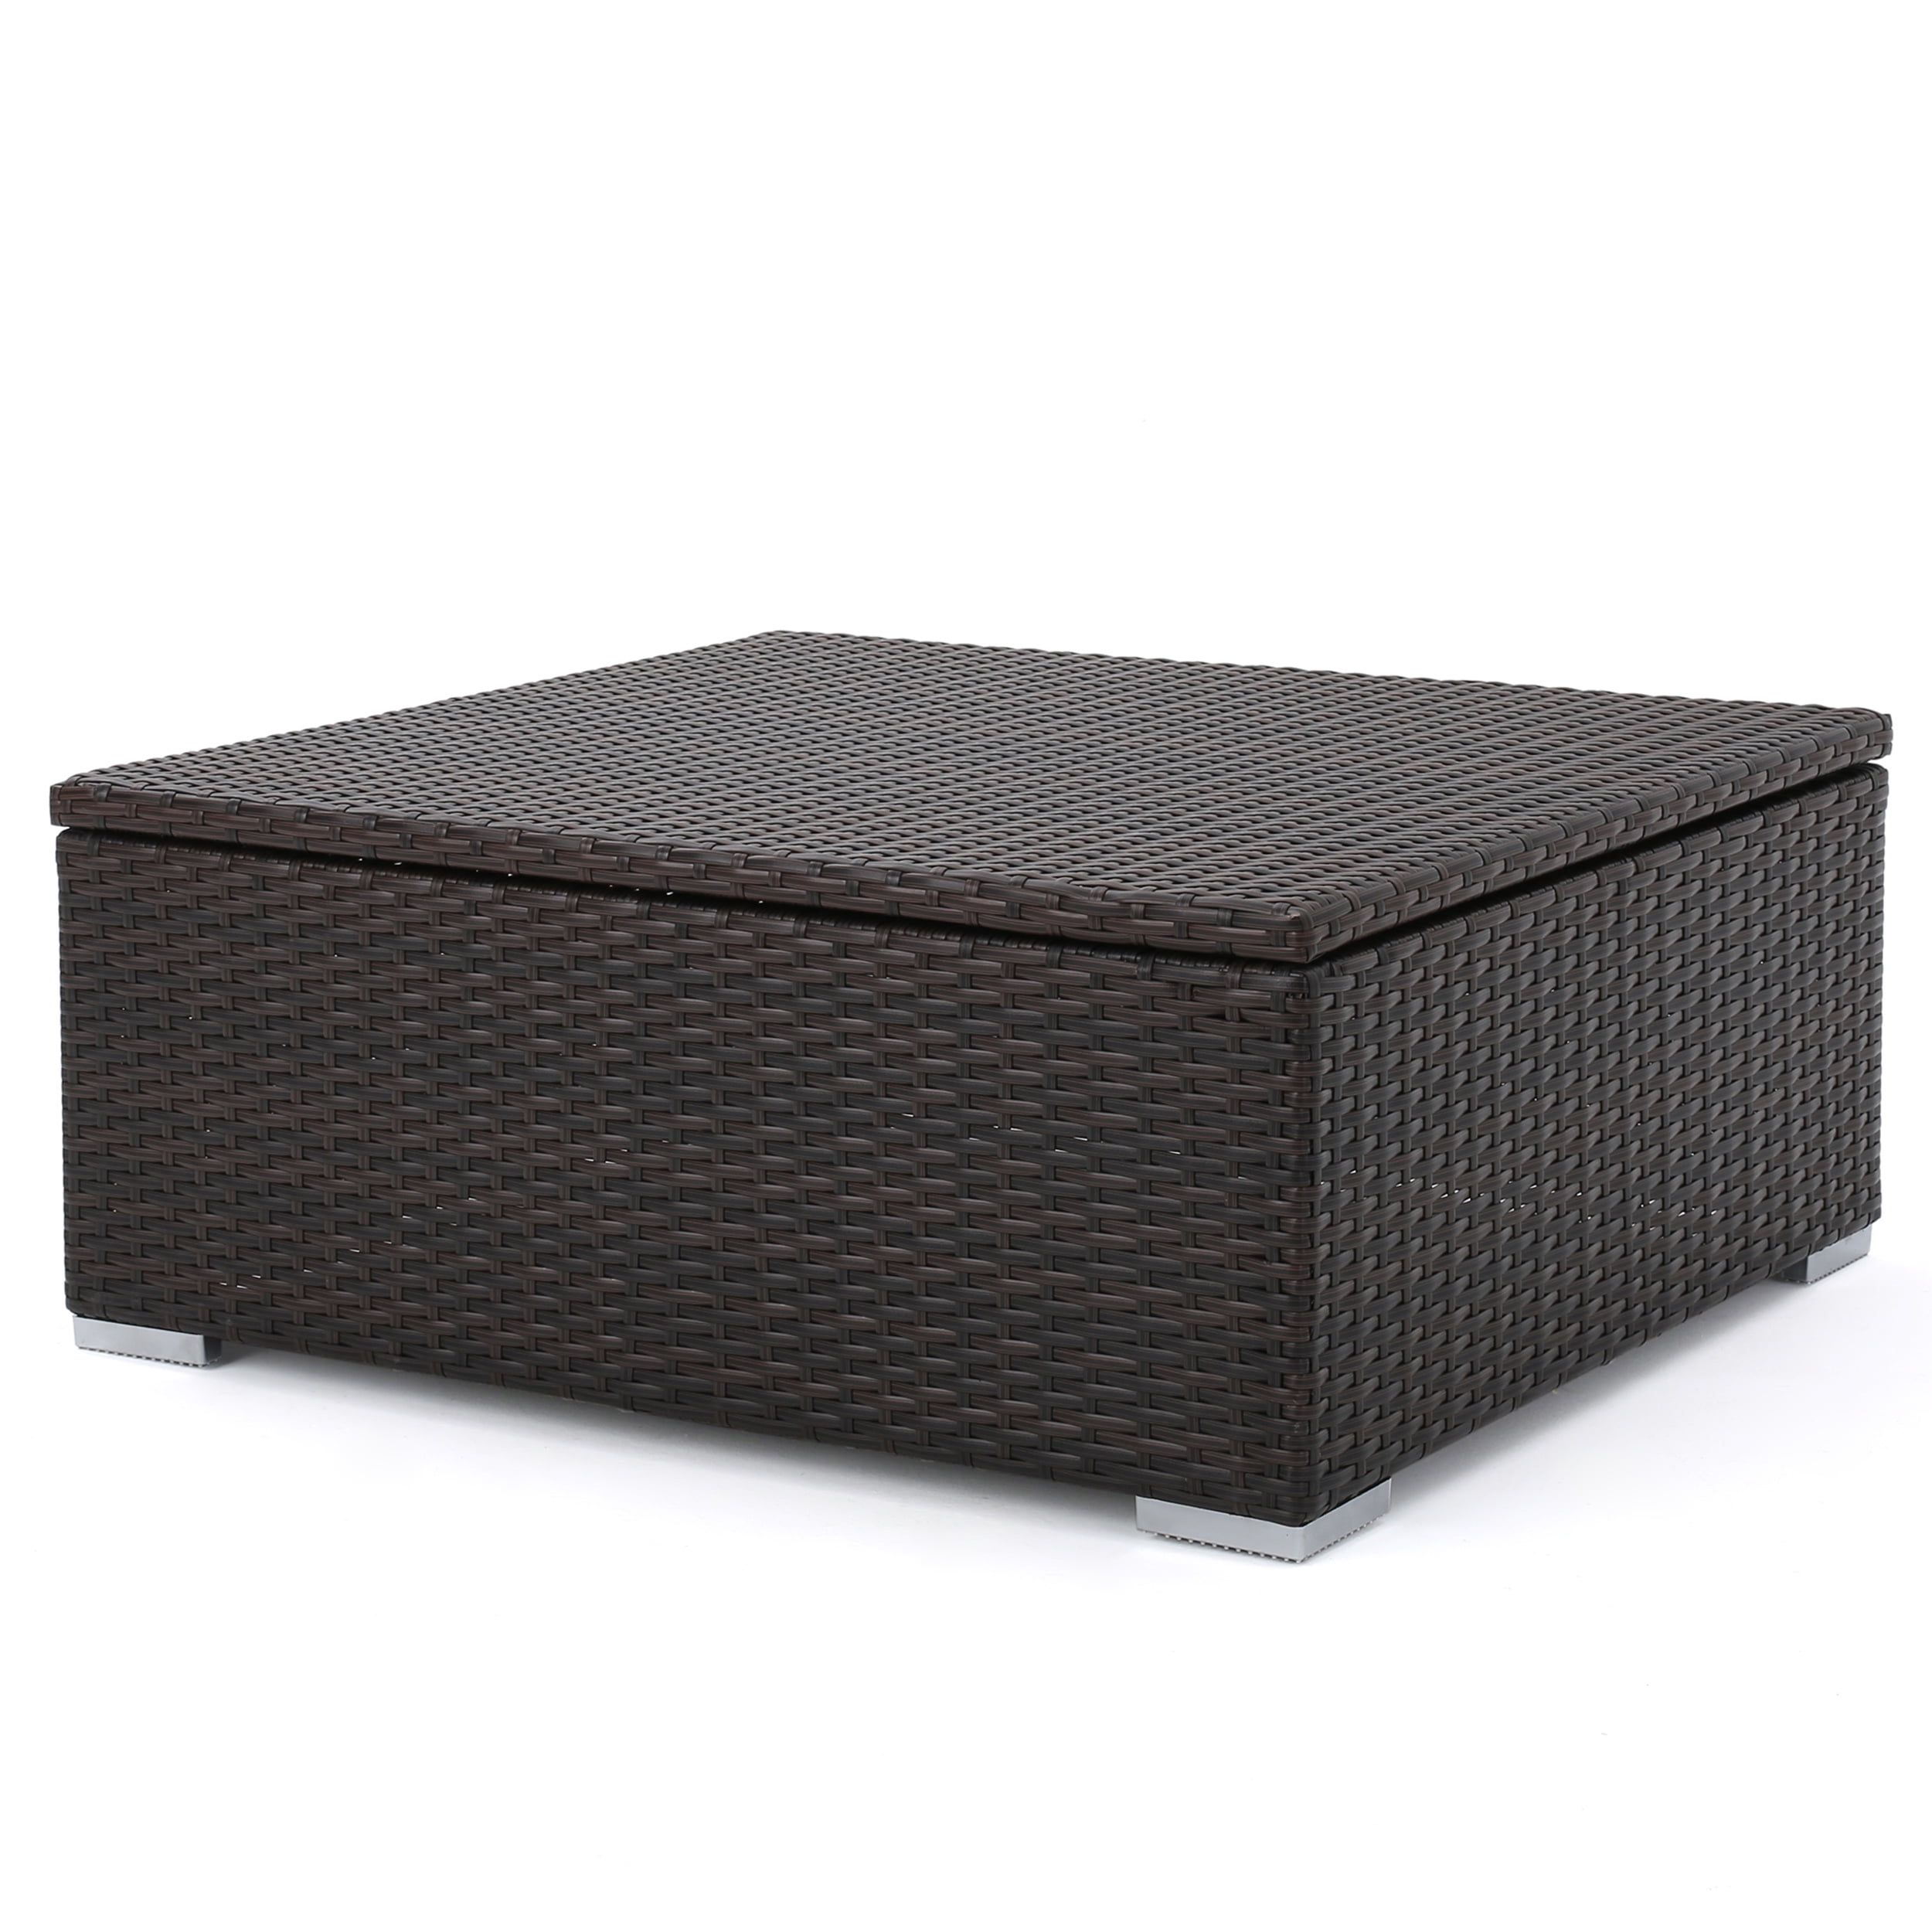 Costa Mesa Outdoor Wicker Coffee Table With Storage, Multibrown Pertaining To Outdoor Coffee Tables With Storage (Gallery 2 of 20)